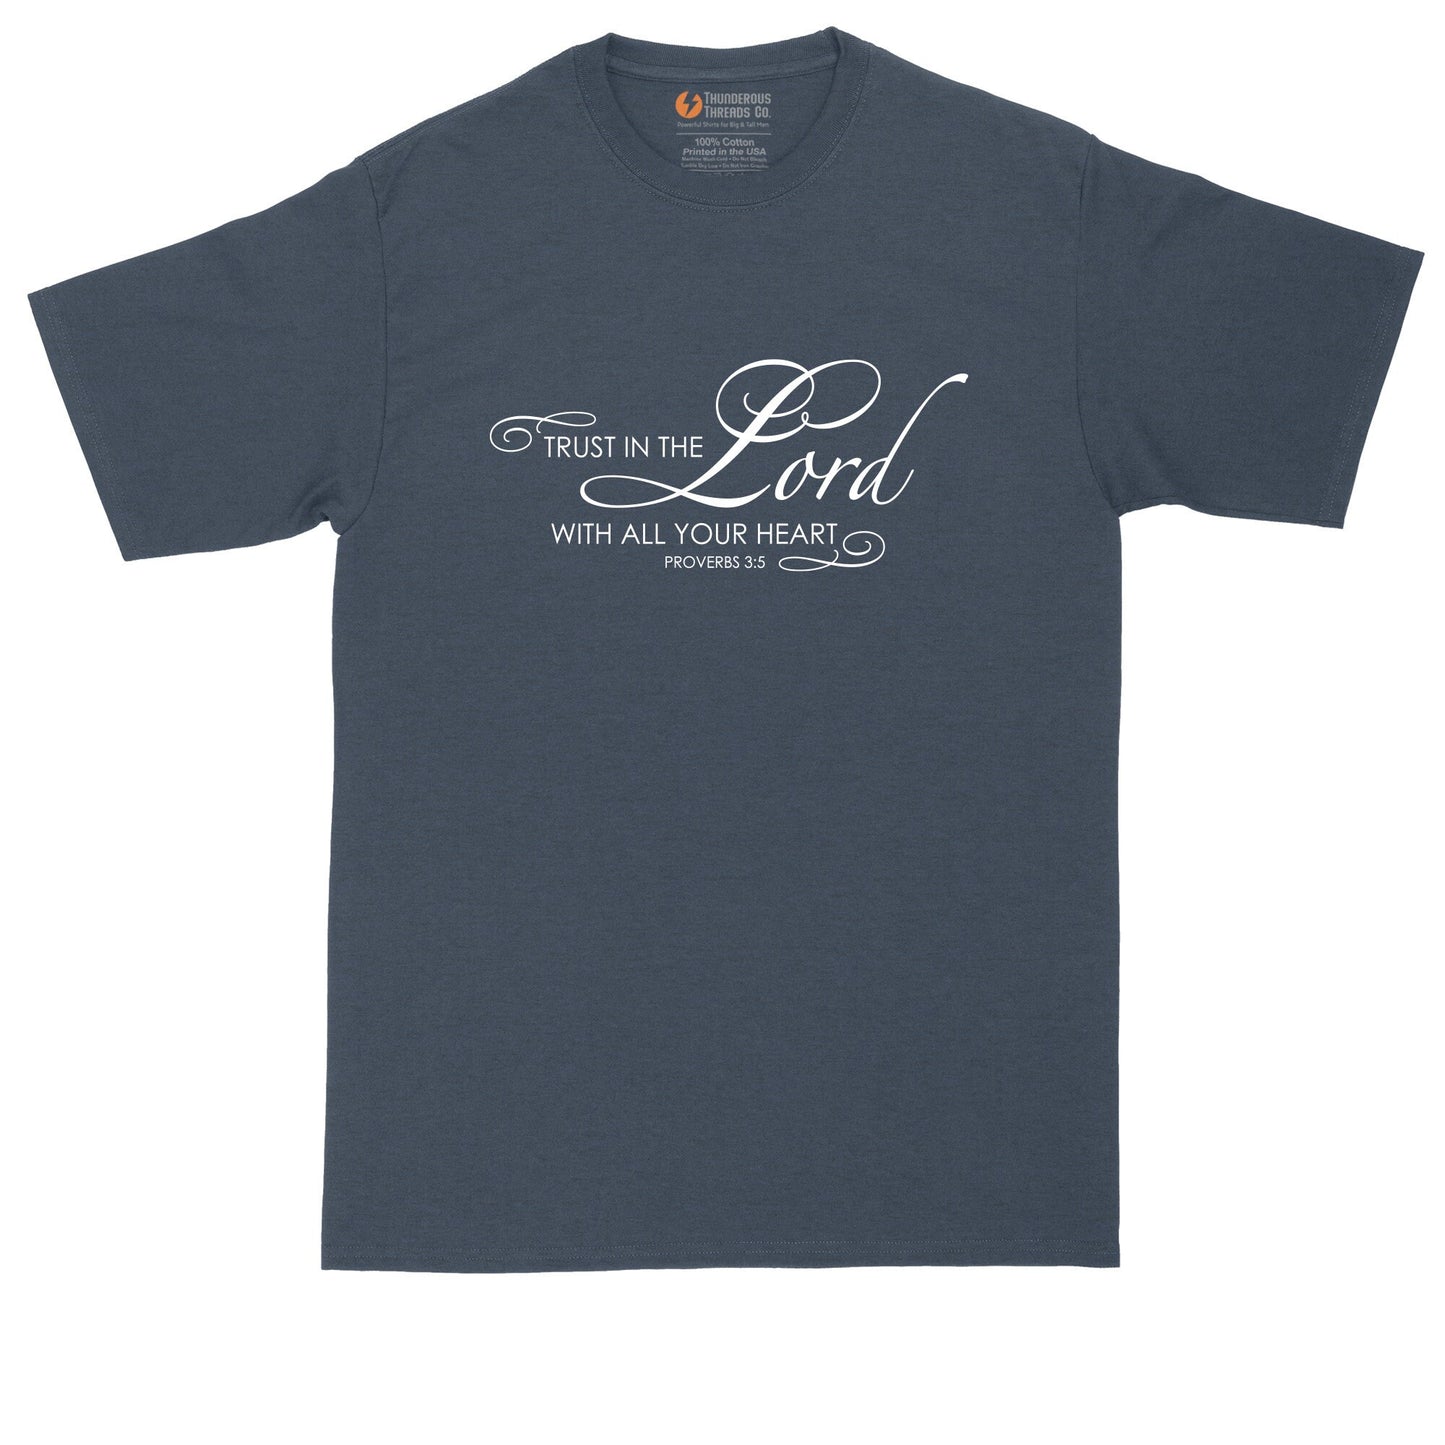 Trust in the Lord with All Your Heart | Mens Big and Tall T-Shirt | Funny Christian T-Shirt | Prayer Shirt | Proverbs 3:5